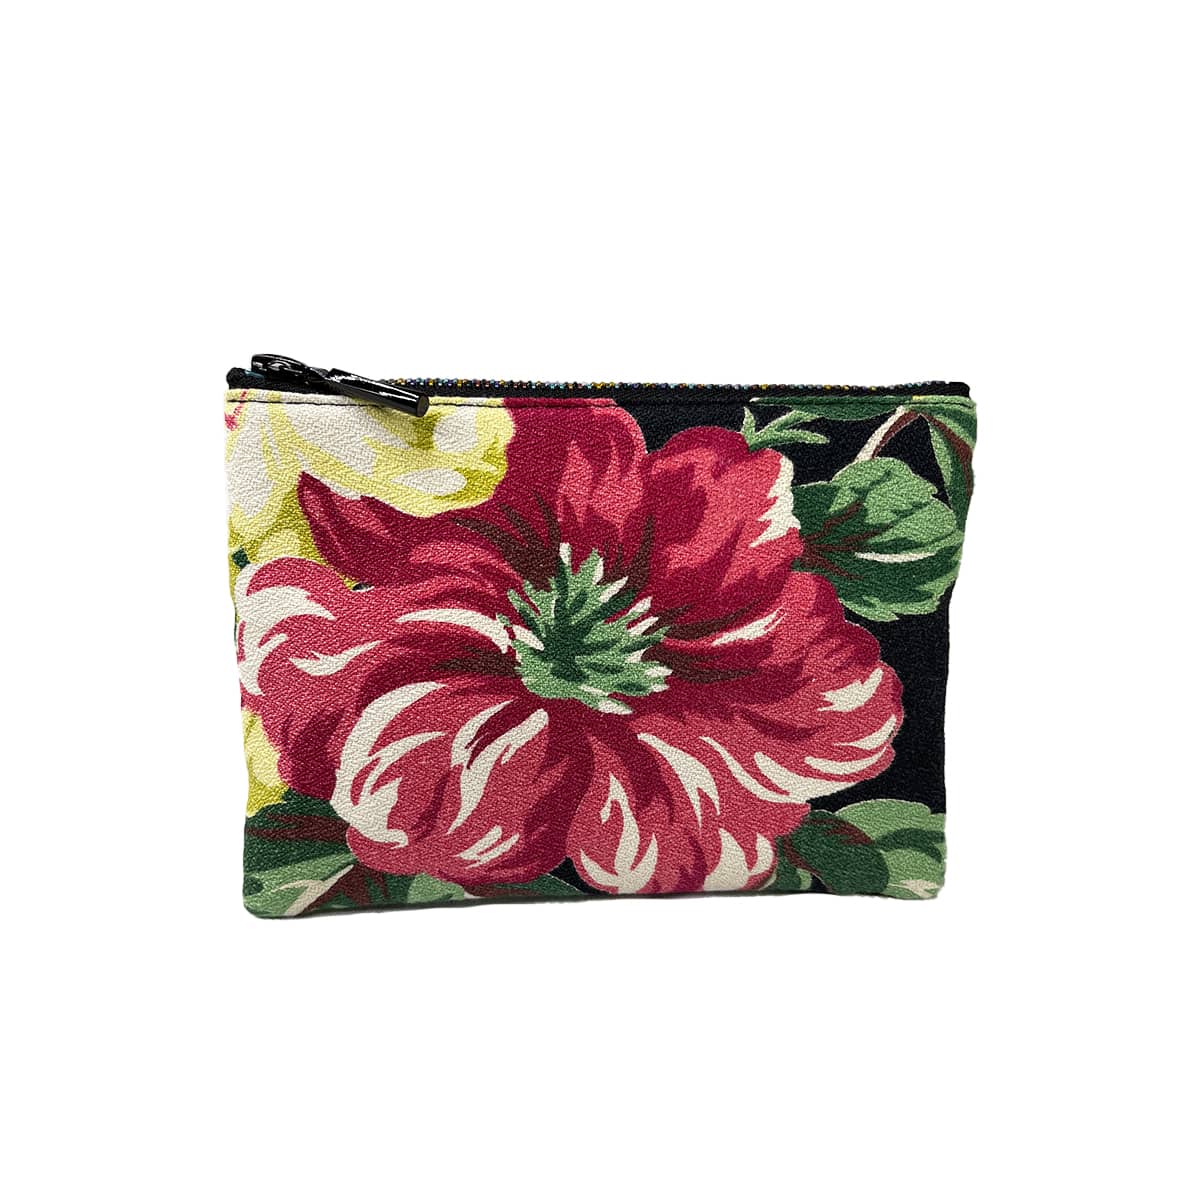 Coin purse – floral on black